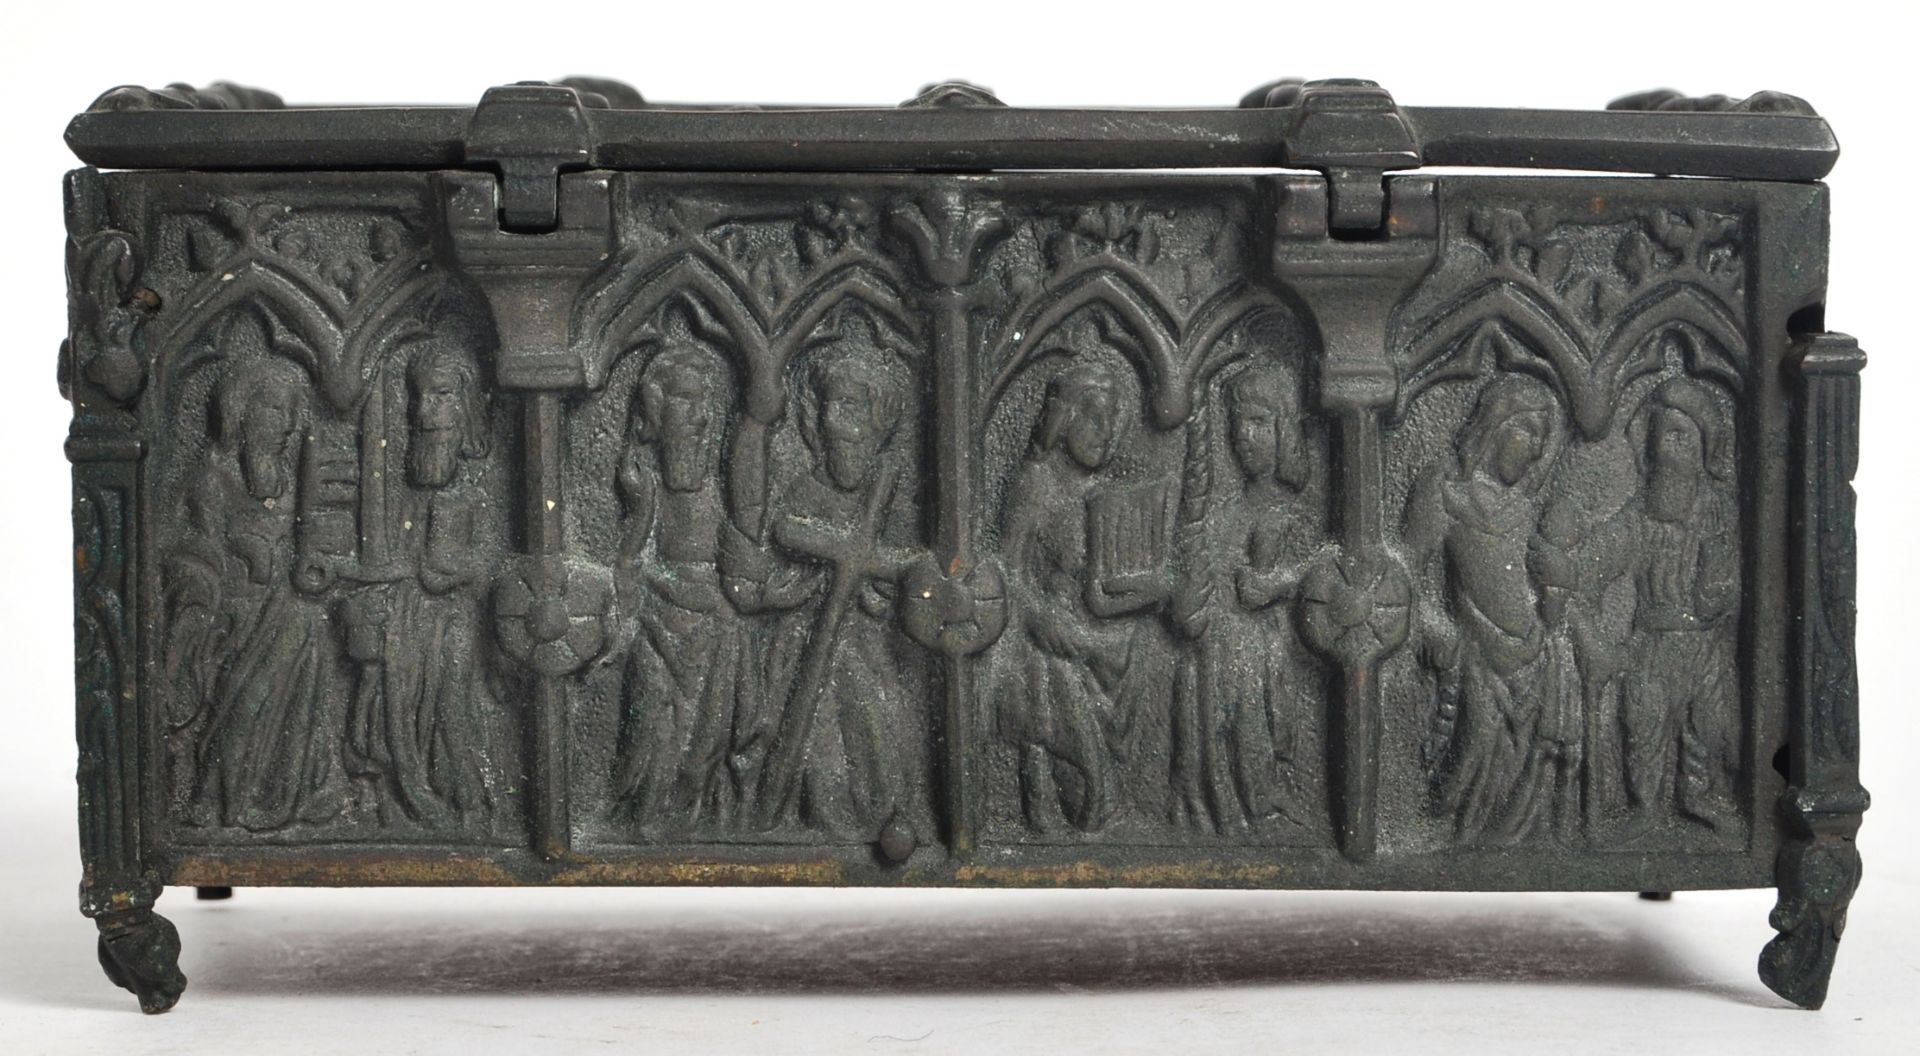 SMALL NINETEENTH CENTURY BRONZE CASKET WITH GOTHIC INLAY - Image 4 of 7